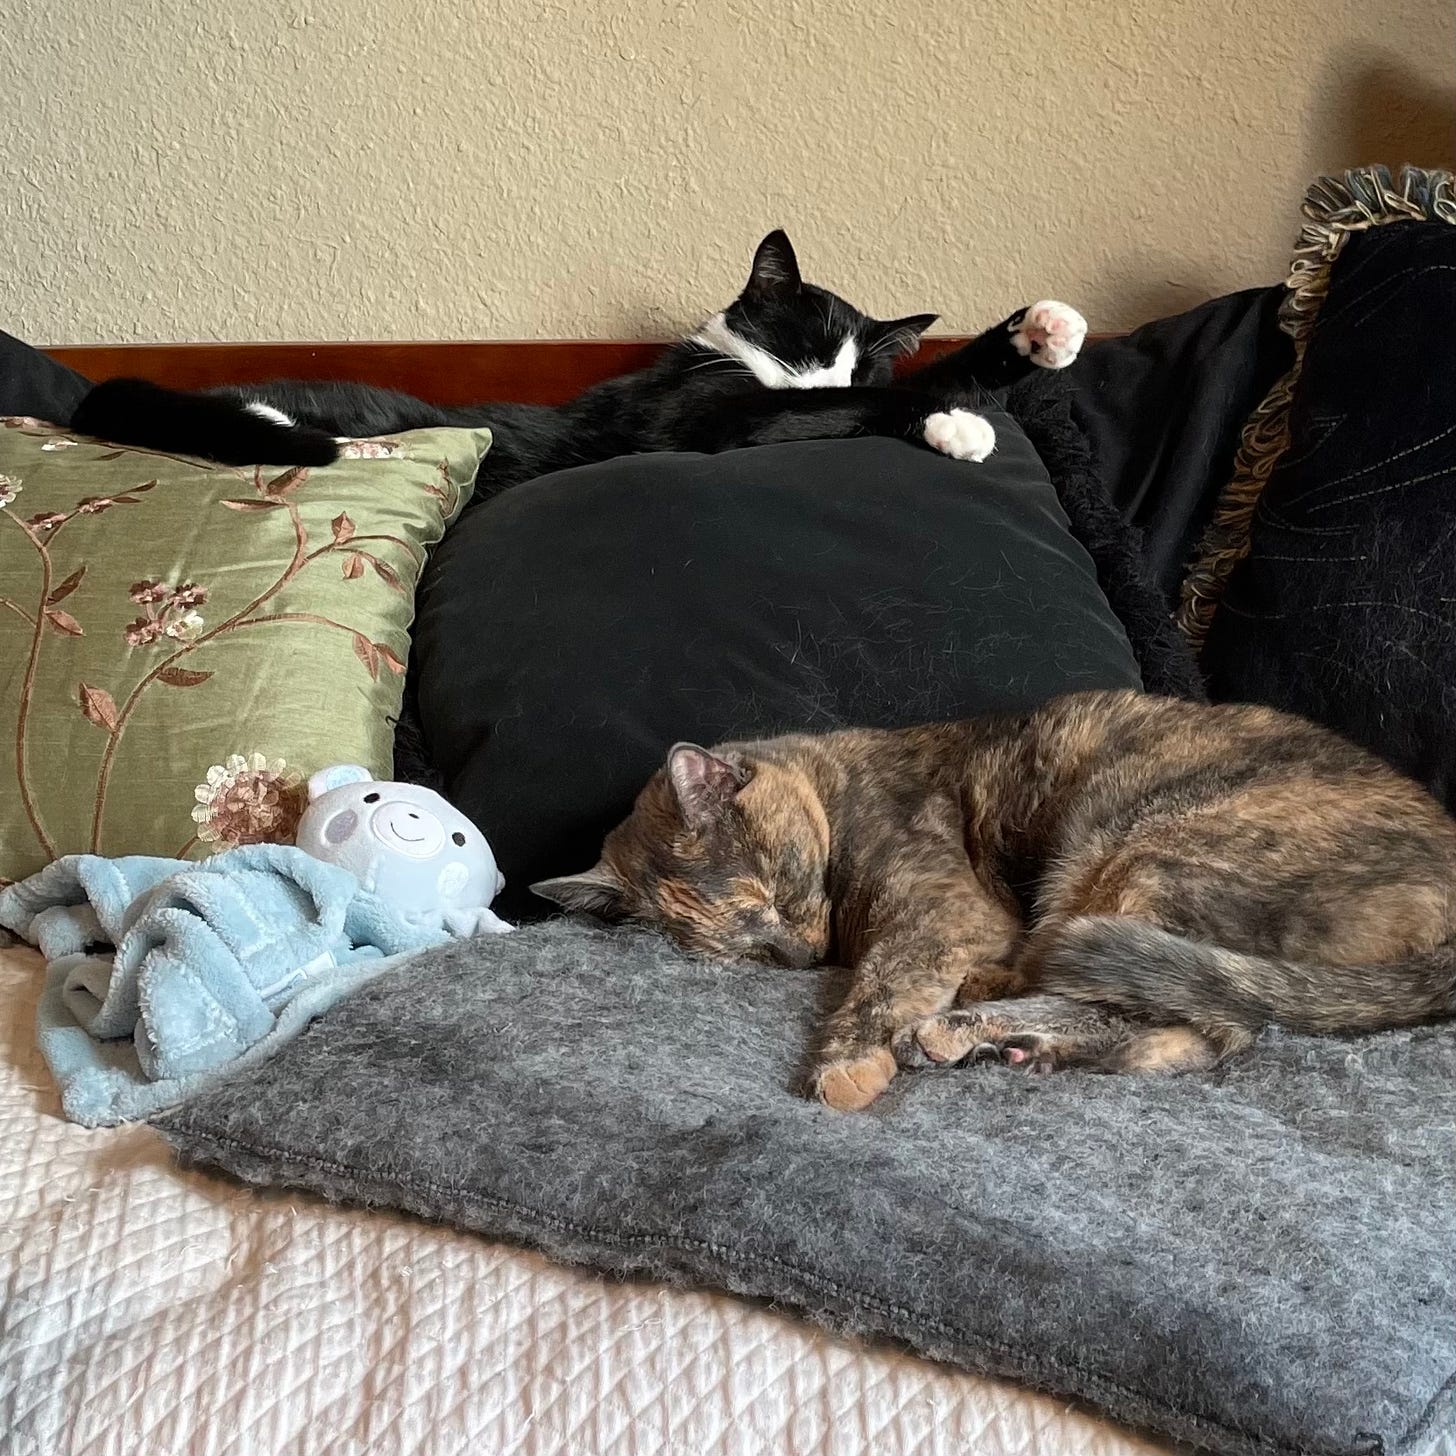 A dilute tortoiseshell cat is neatly curled up on a grey sleeping pad on a couch. Behind her, her tuxedo brother is sprawled across several pillows.